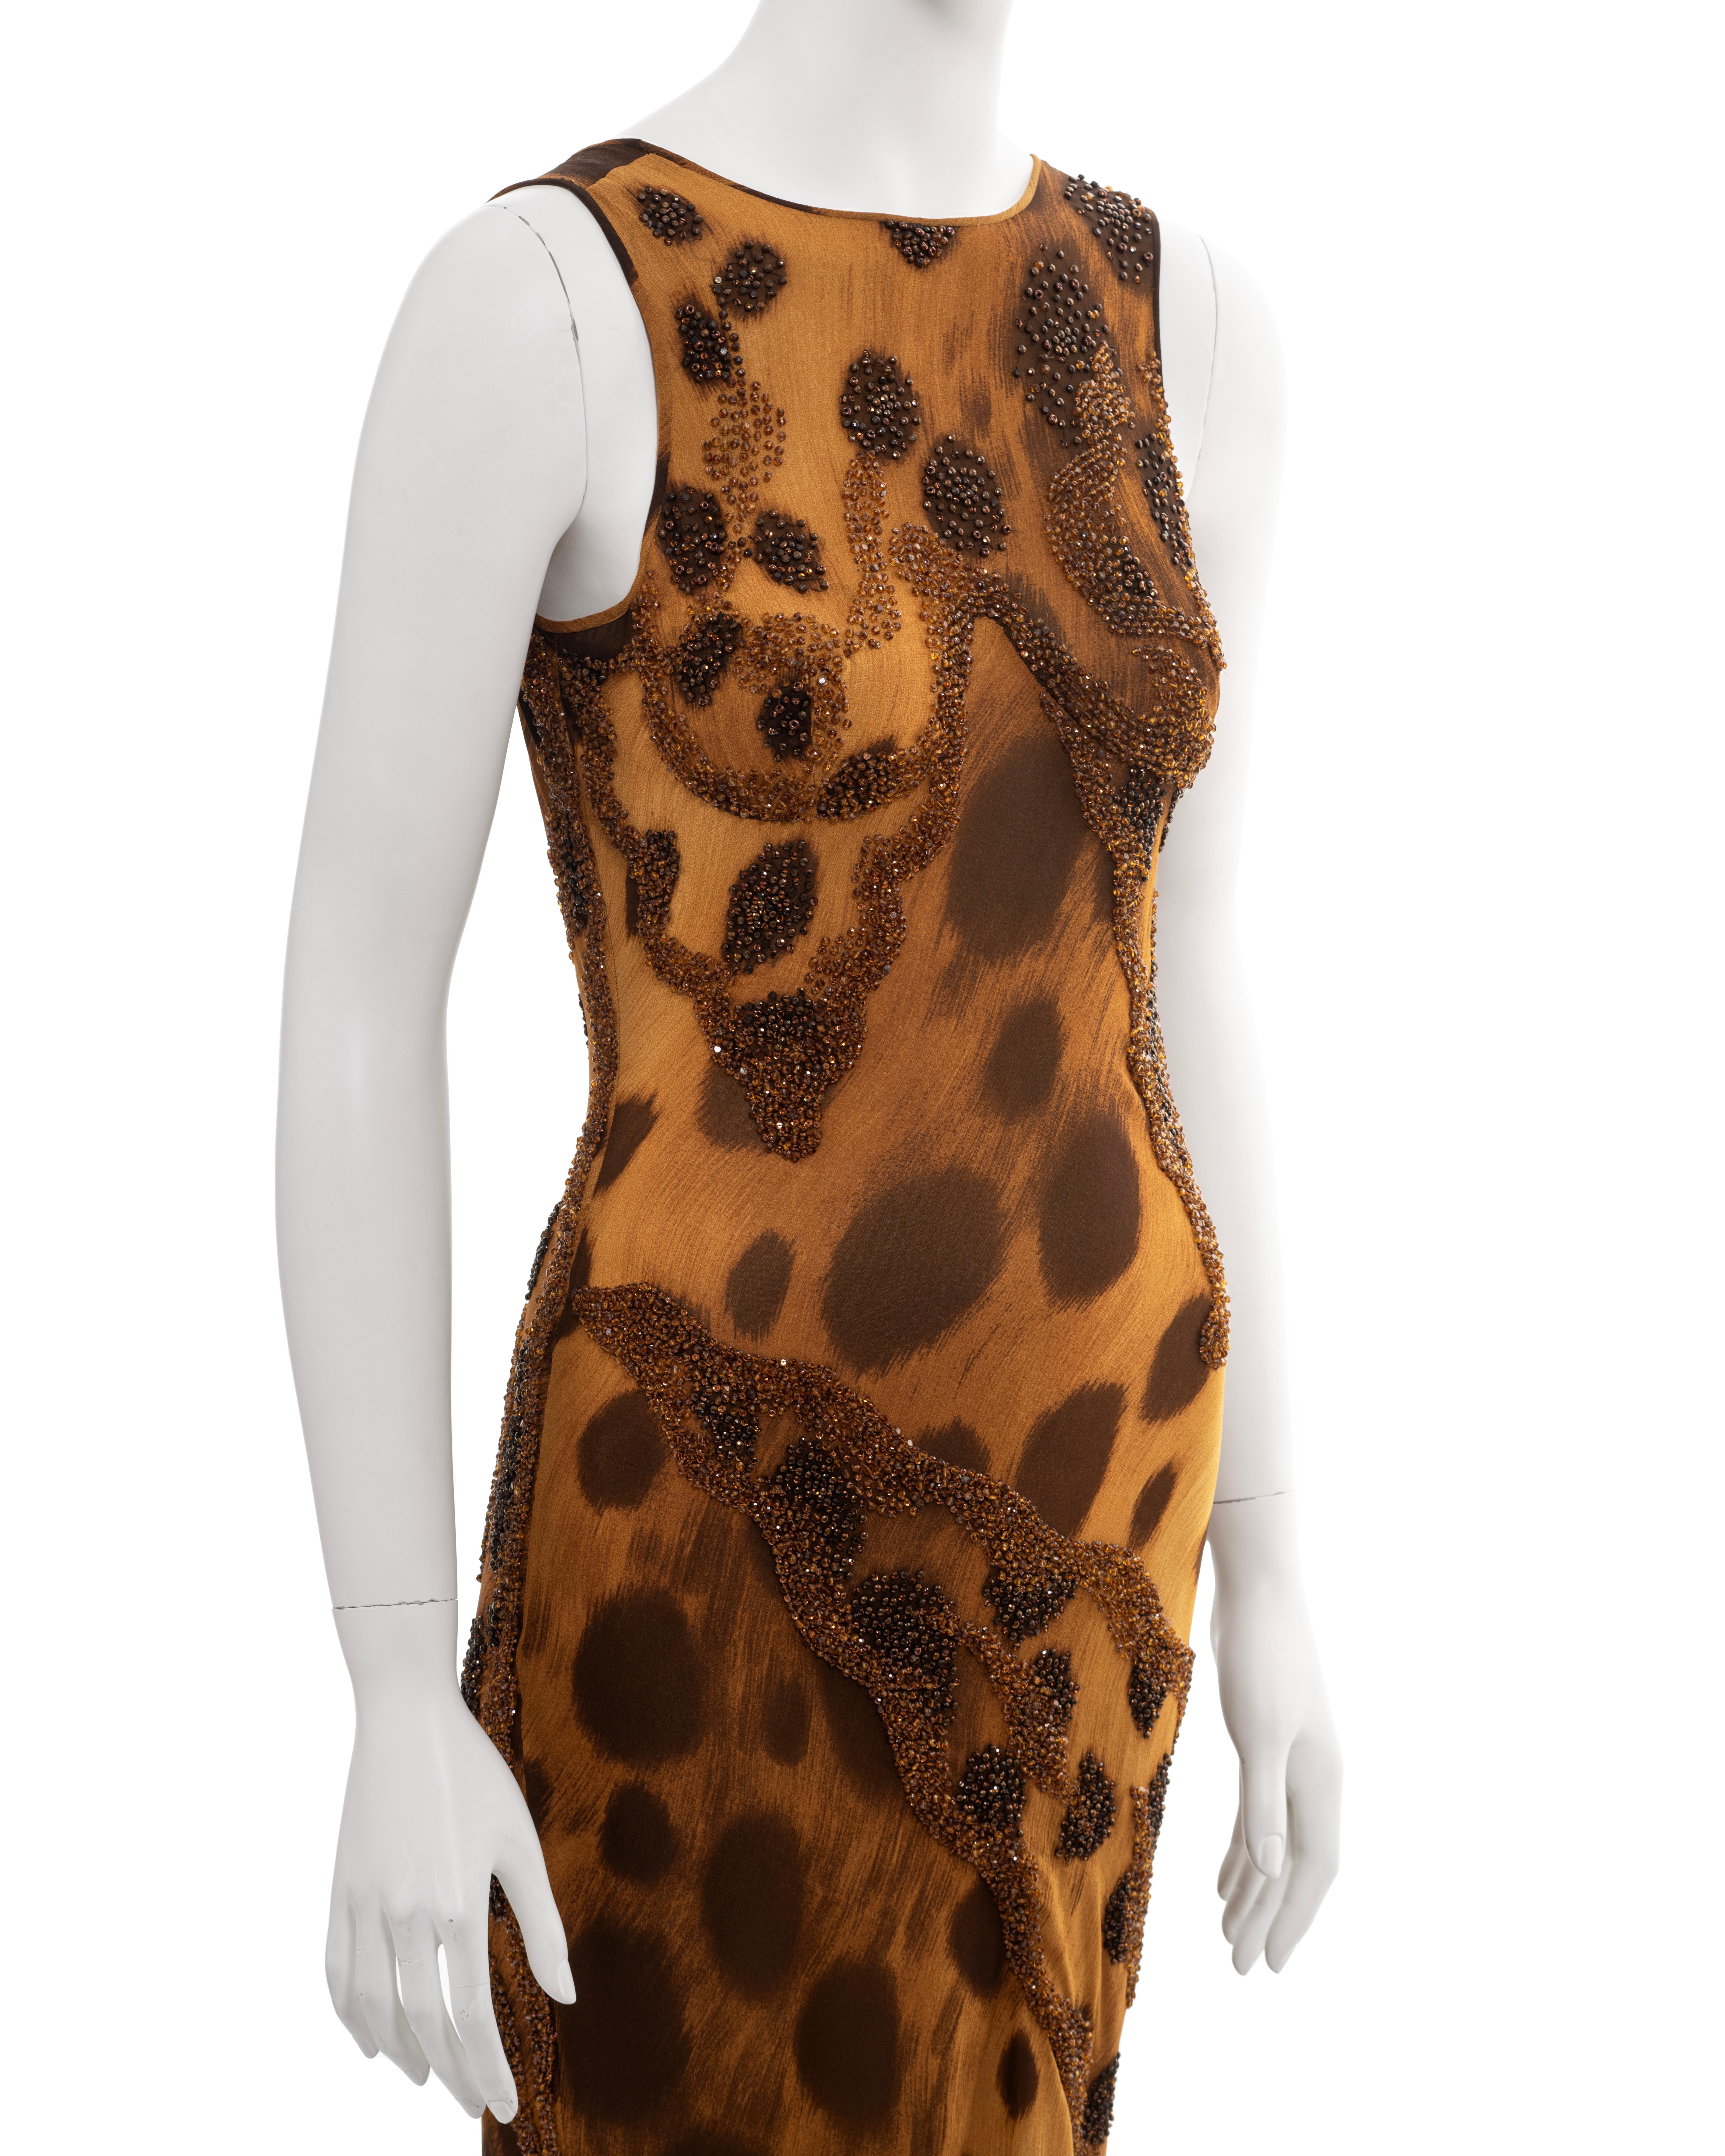 Atelier Versace Couture silk evening dress with beaded cheetah print, fw 1996 For Sale 4